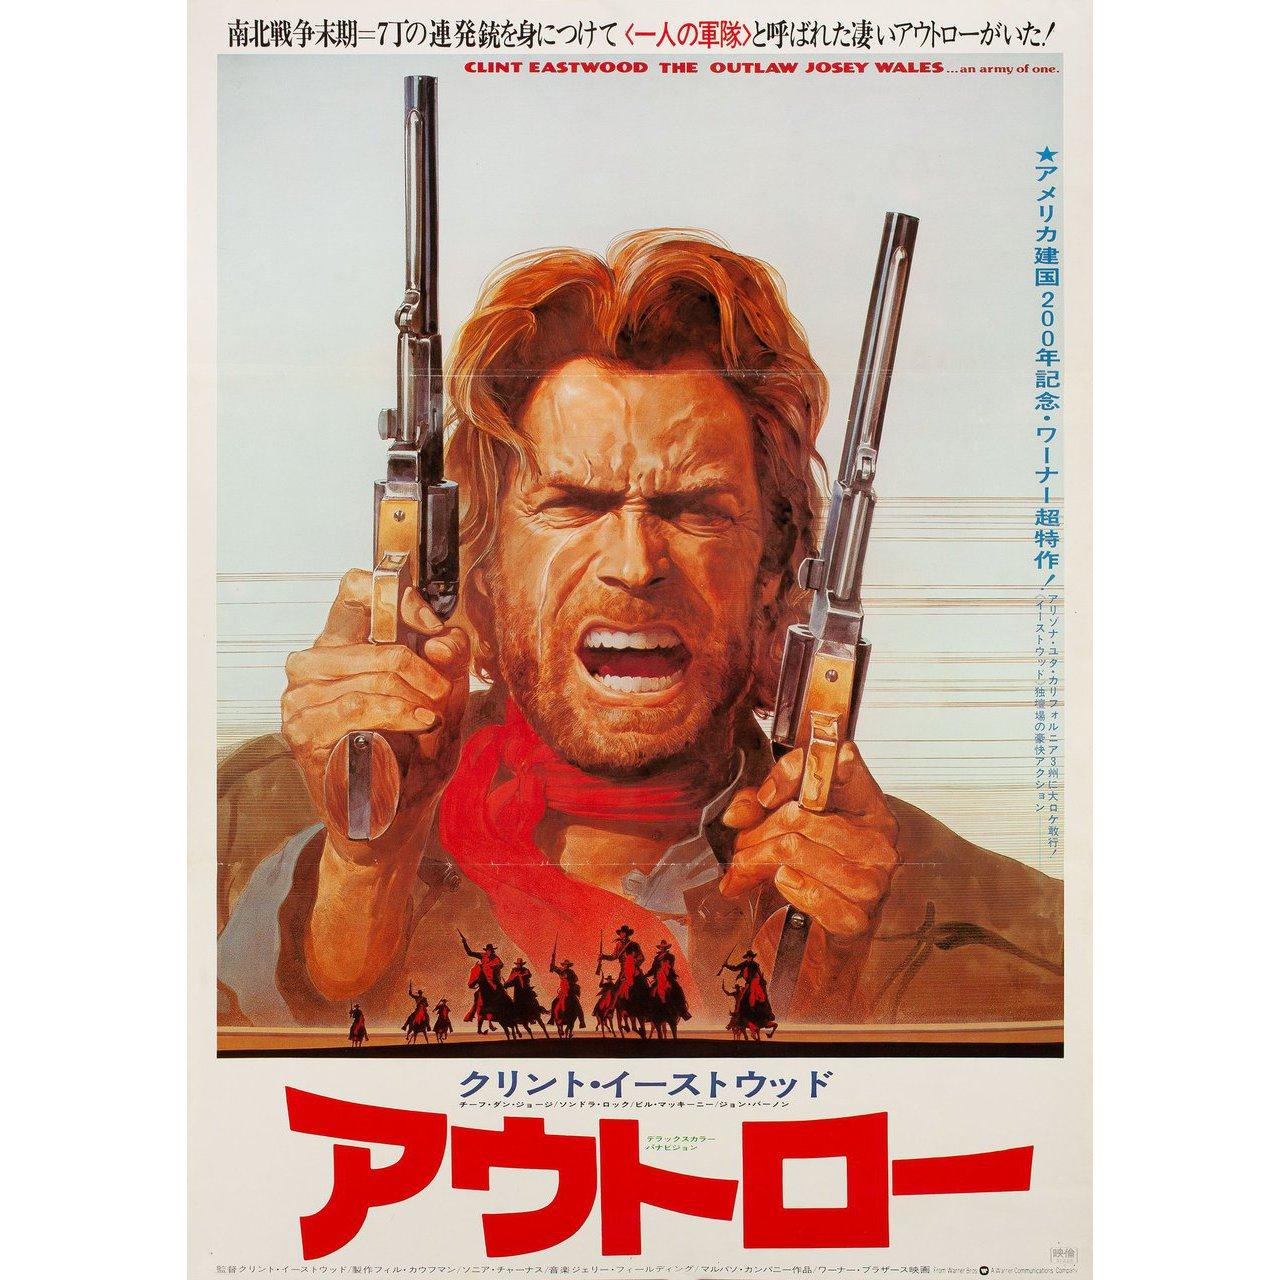 Original 1976, Japanese B2 poster by Roy Andersen for the film The Outlaw Josey Wales directed by Clint Eastwood with Clint Eastwood / Chief Dan George / Sondra Locke / Bill McKinney. Very good-fine condition, folded. Many original posters were